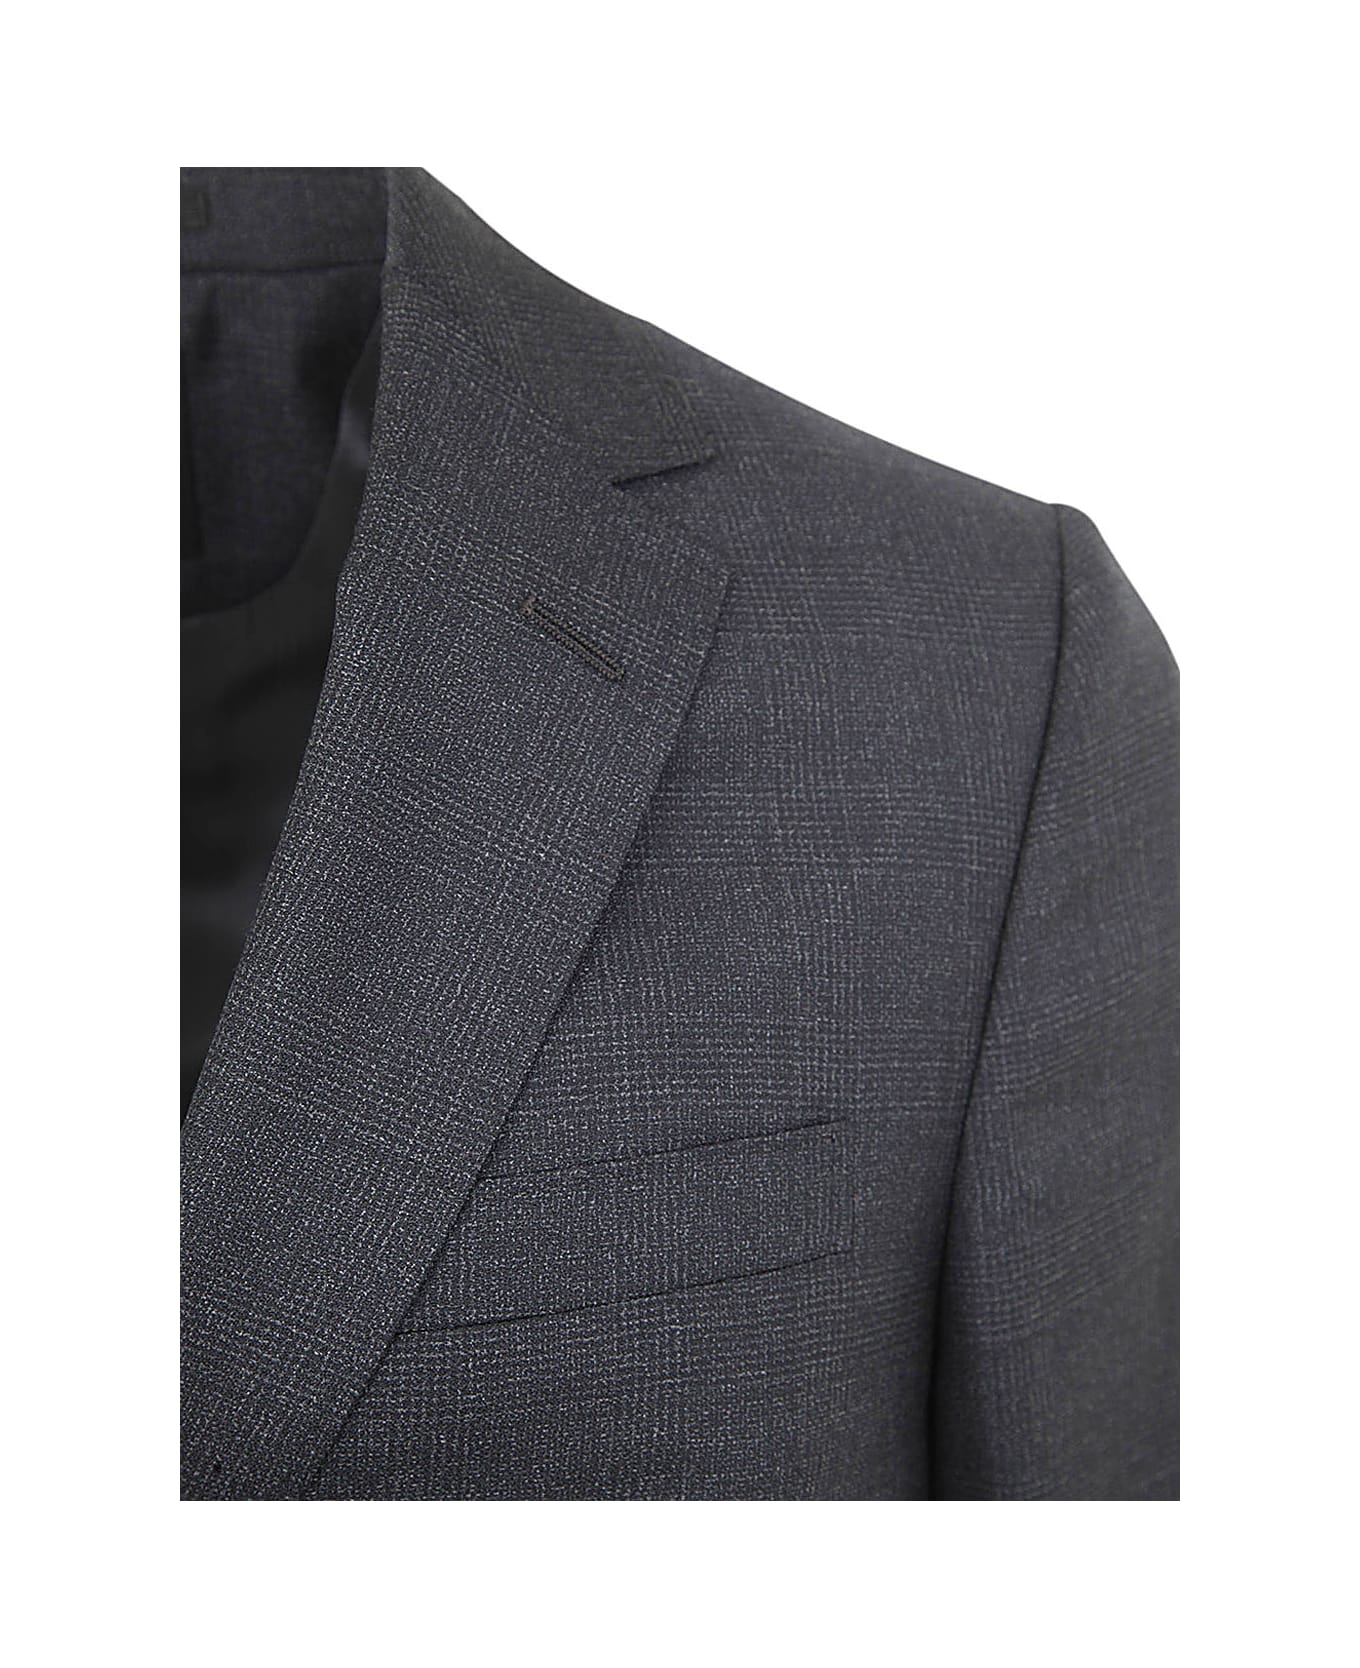 Zegna Pure Wool Suit - Grey